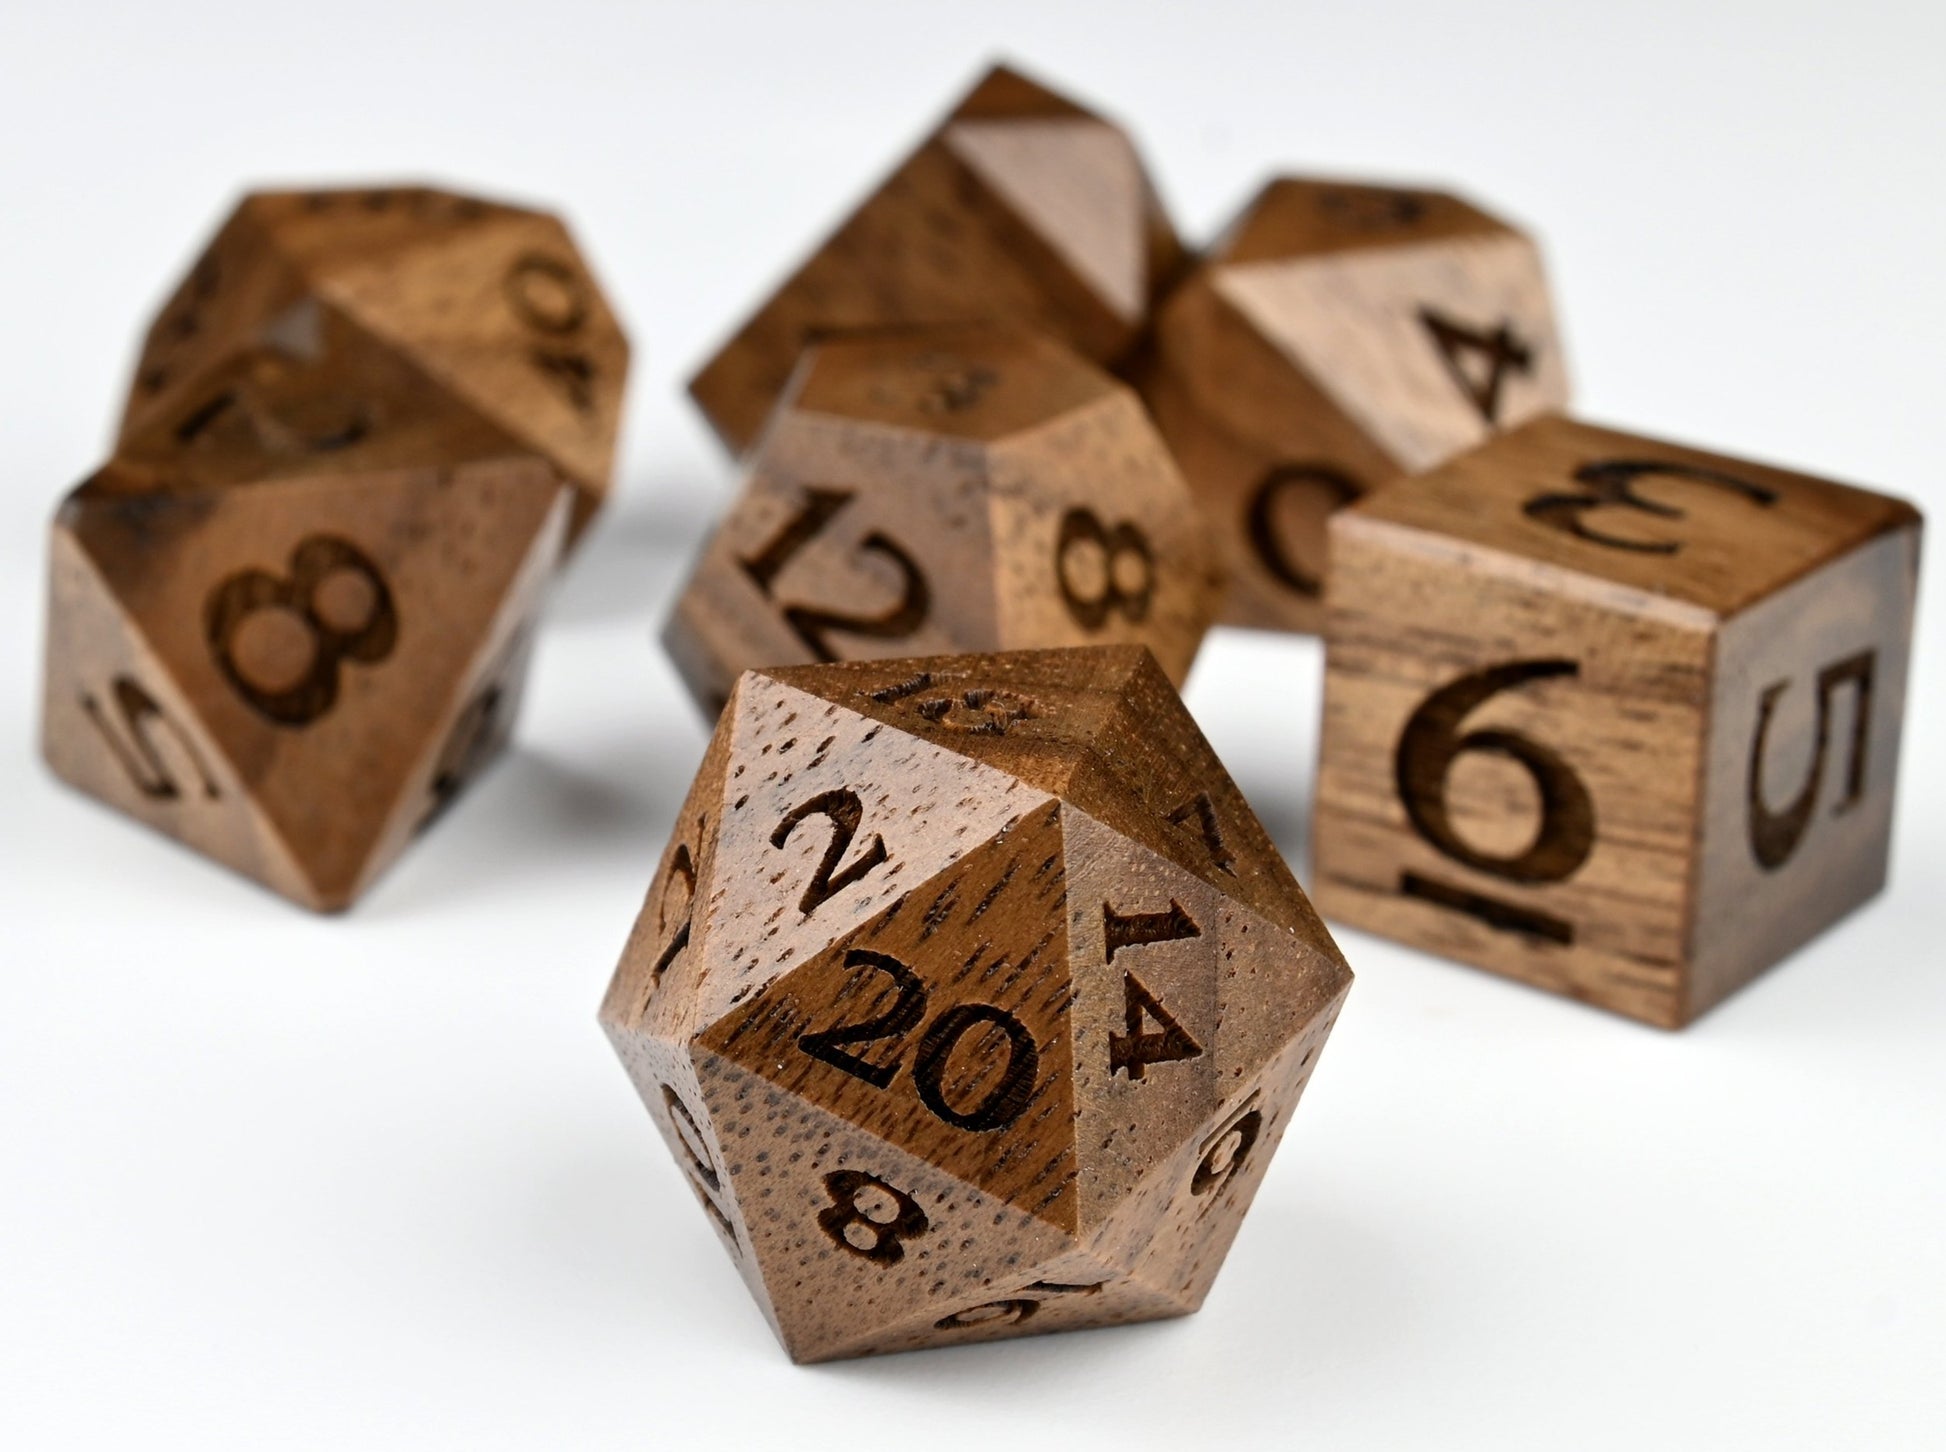 Walnut wooden dice set, dnd dice, rpg dice for dungeons and dragons.